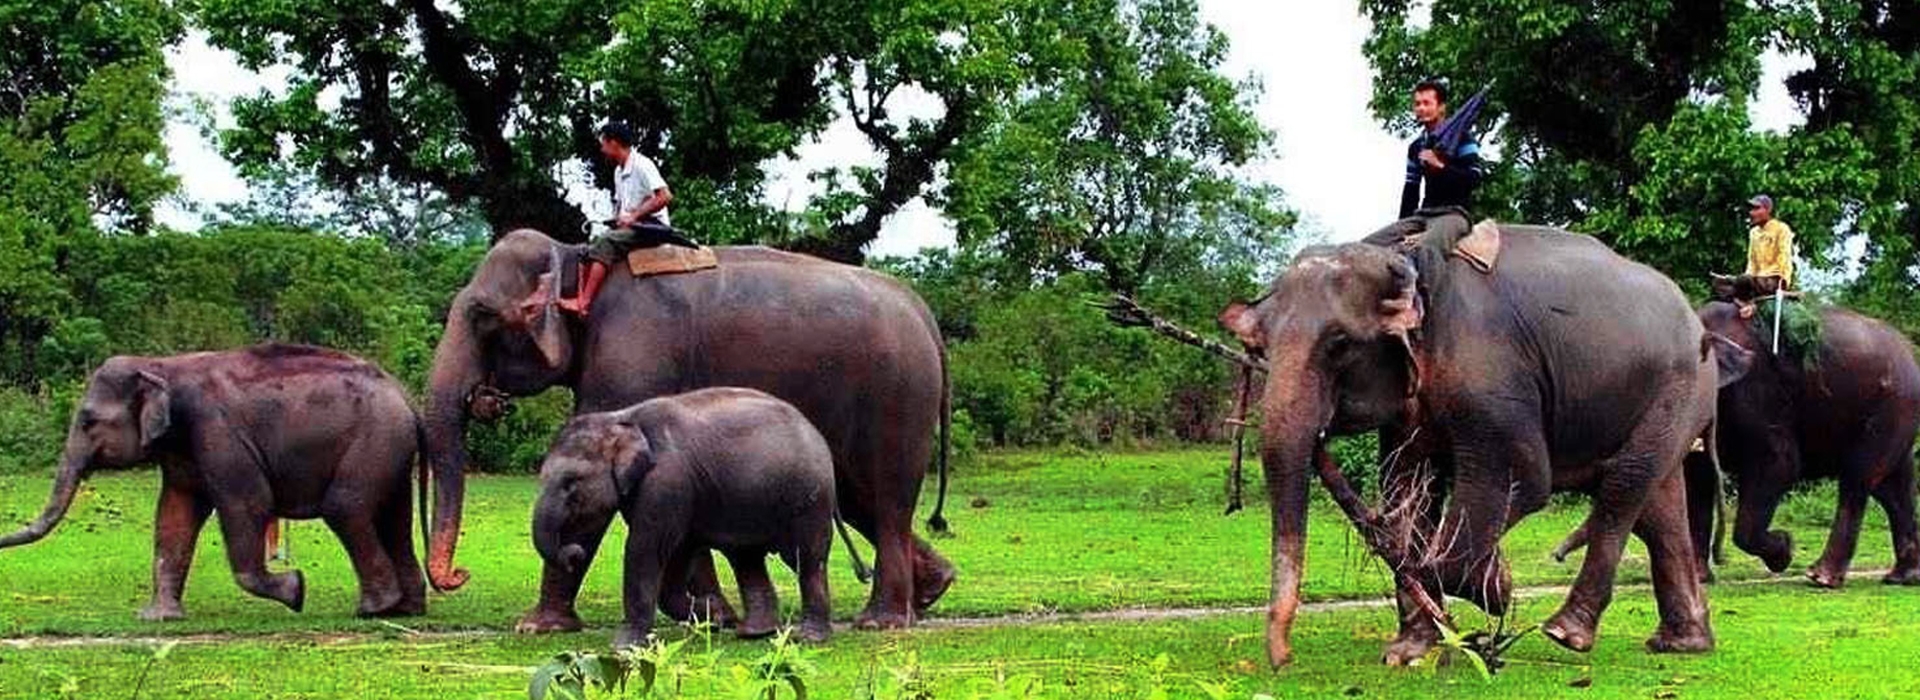 Chitwan National Park (3 days 2 nights package)